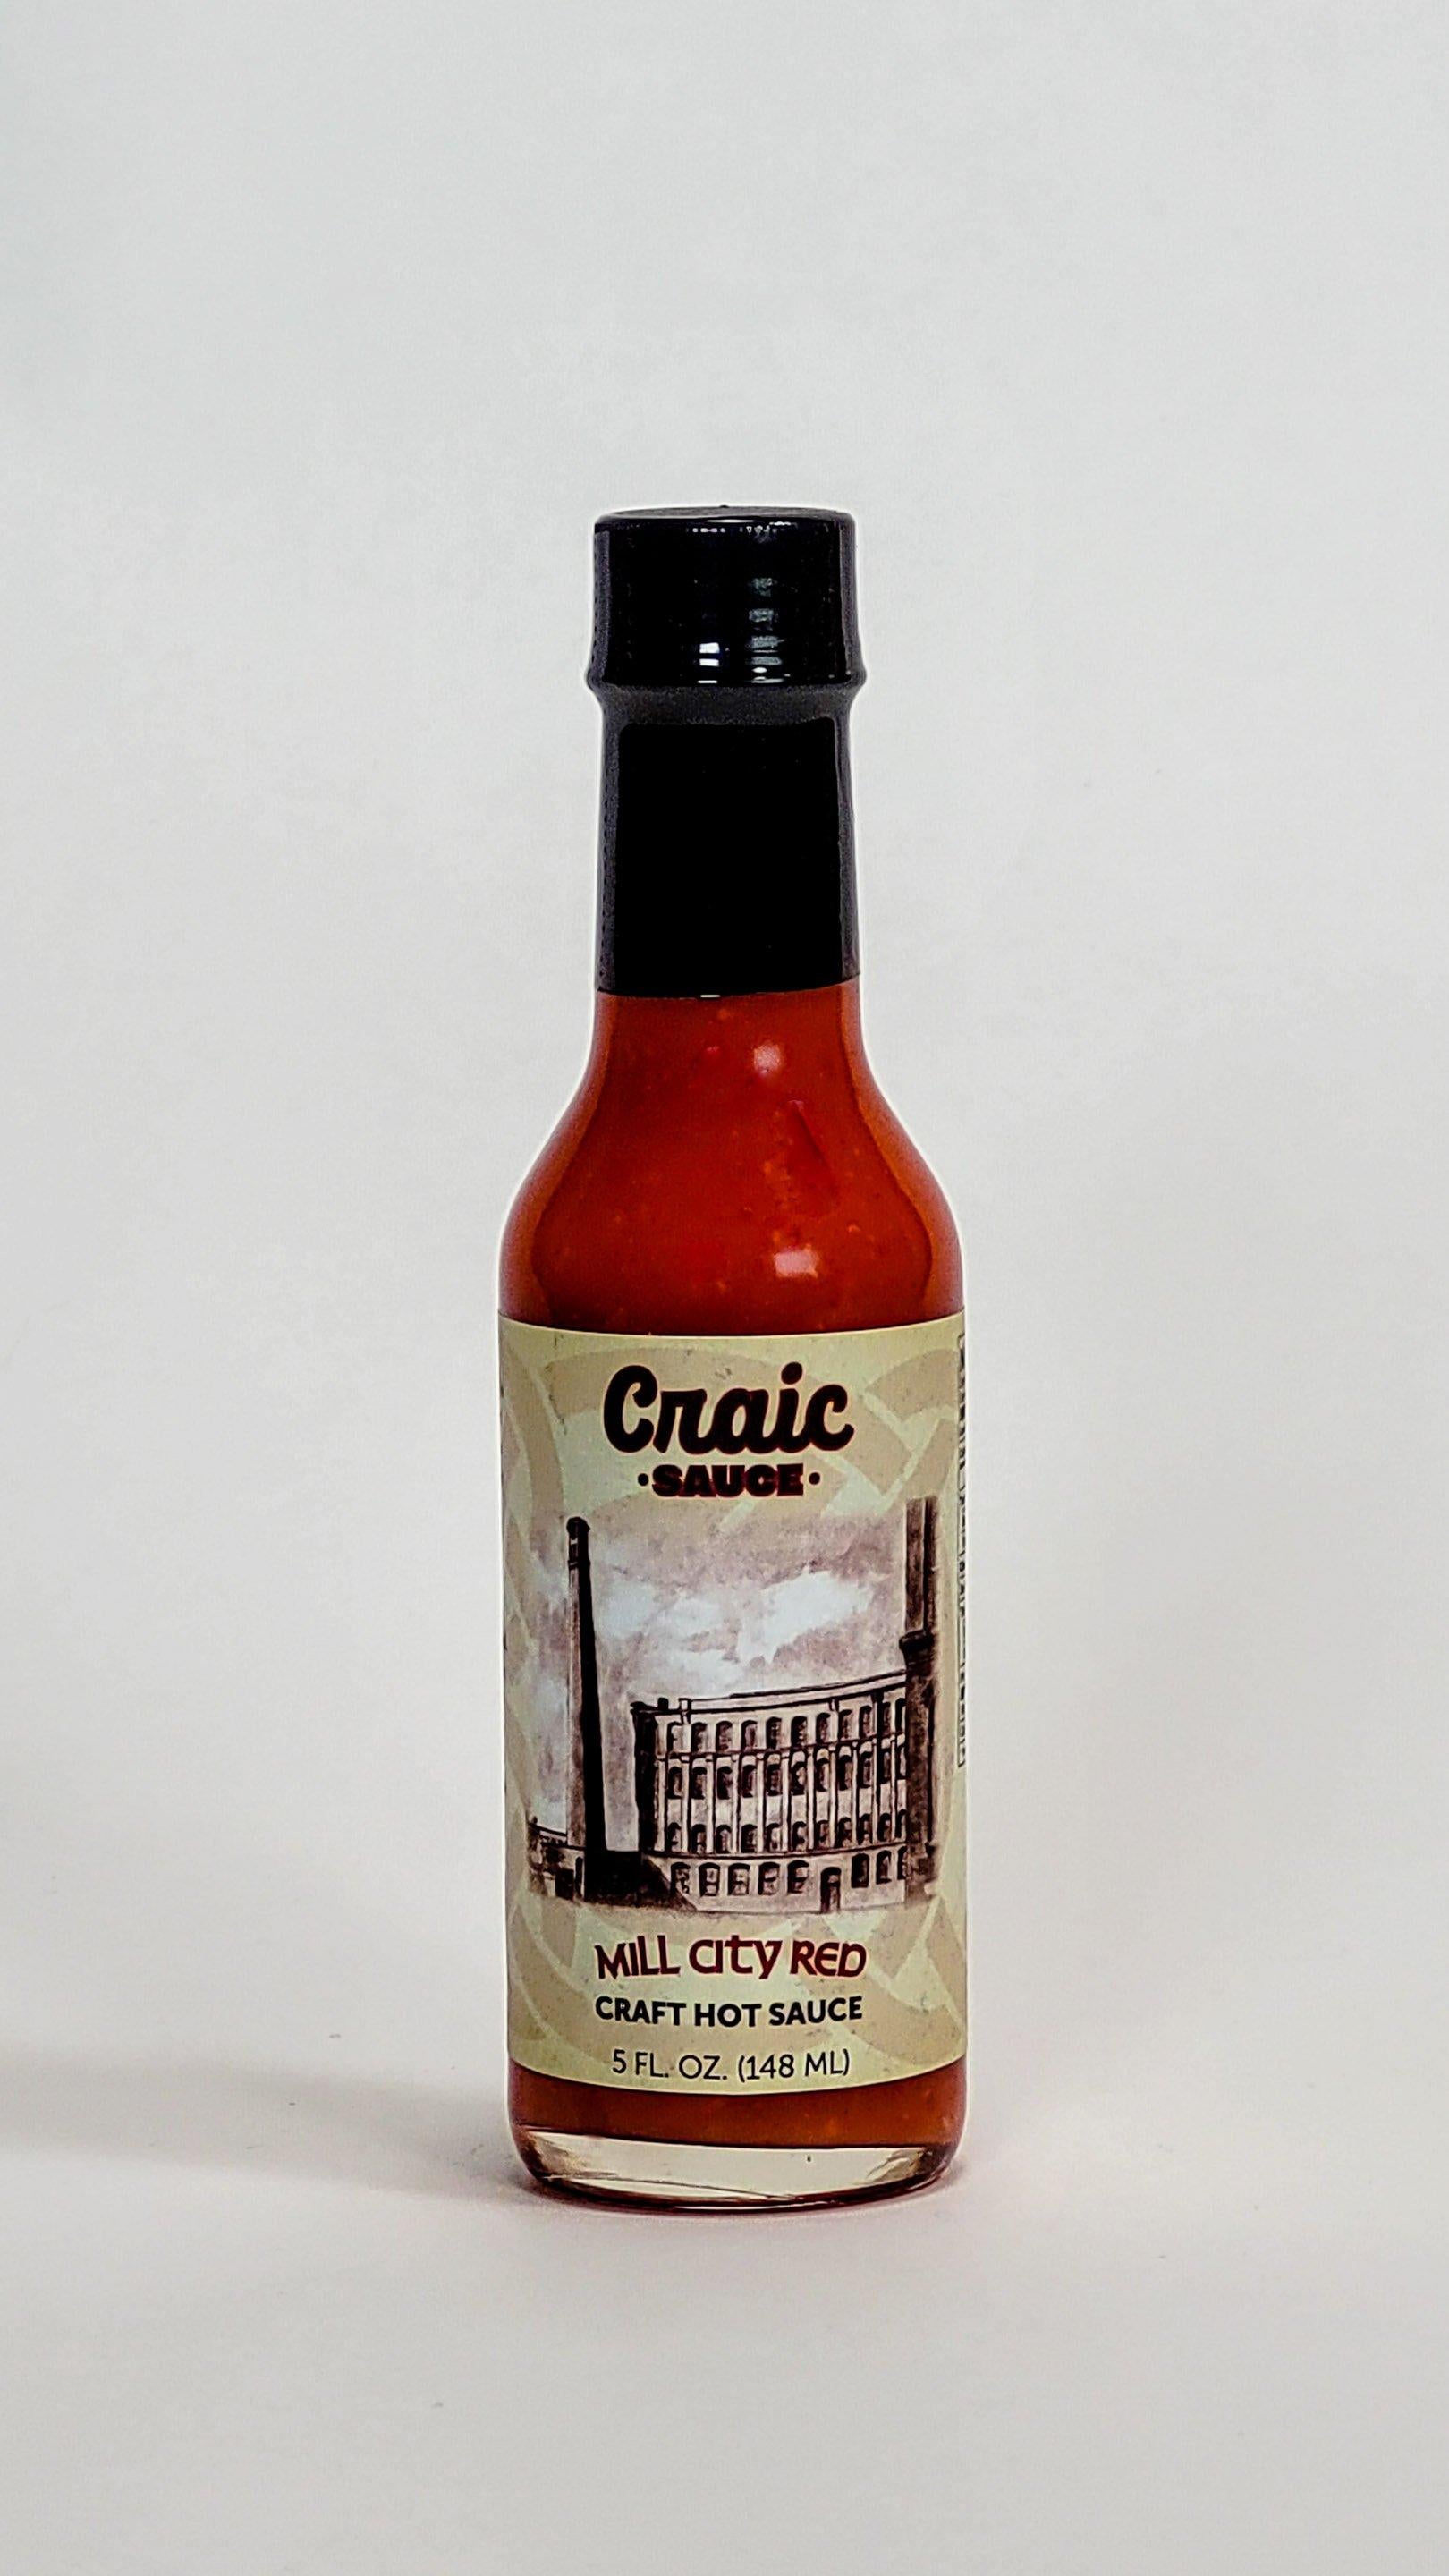 All Products - Craft Hot Sauce